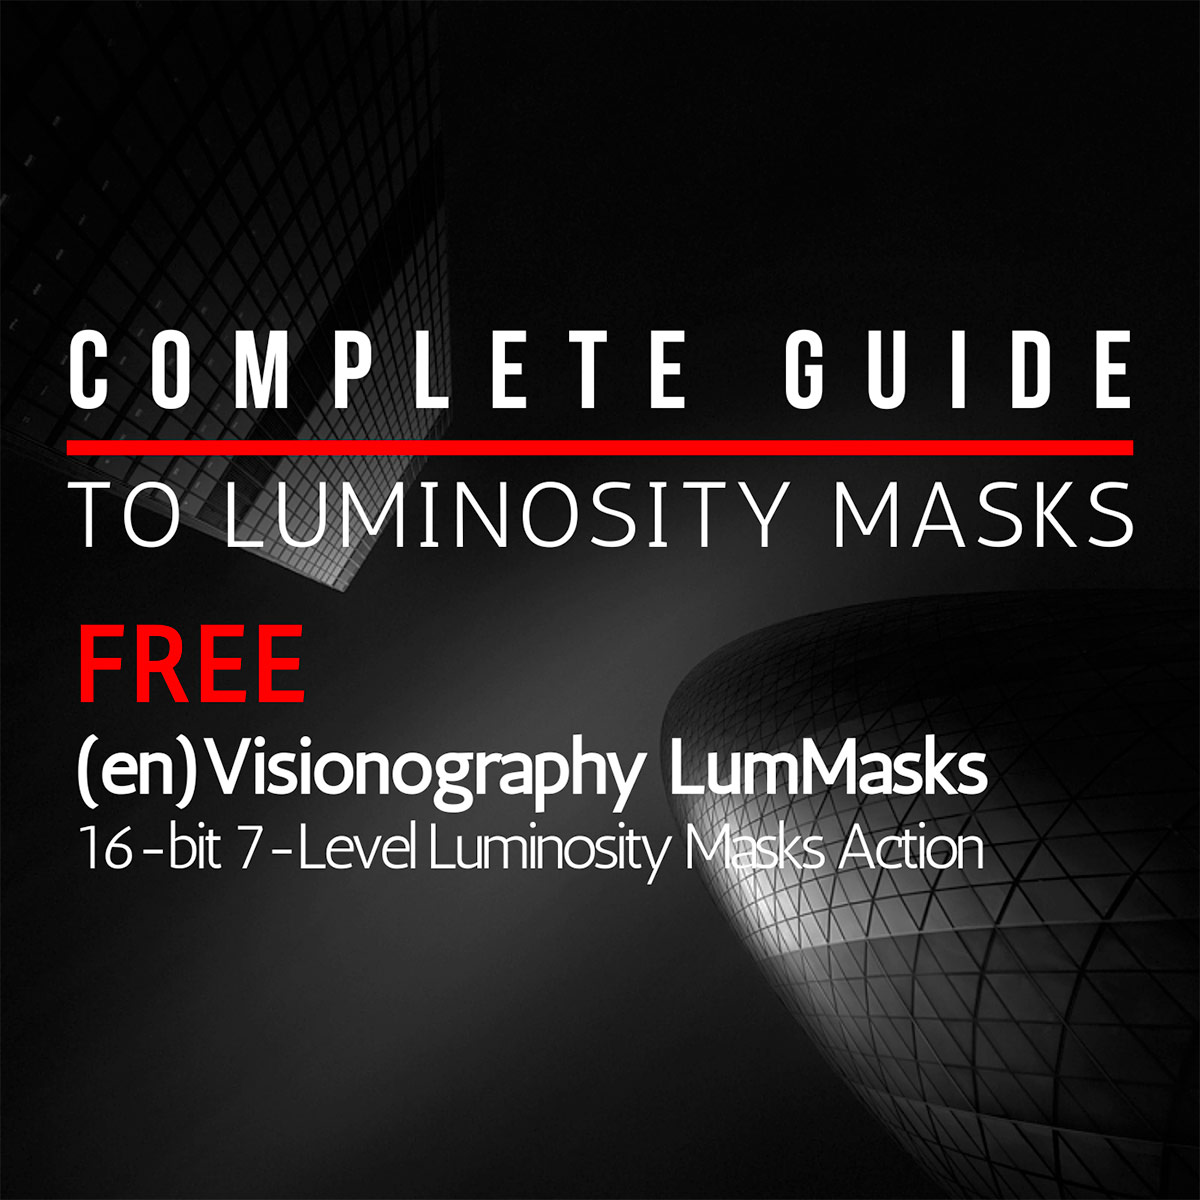 Complete guide to luminosity masks & free luminosity masks action